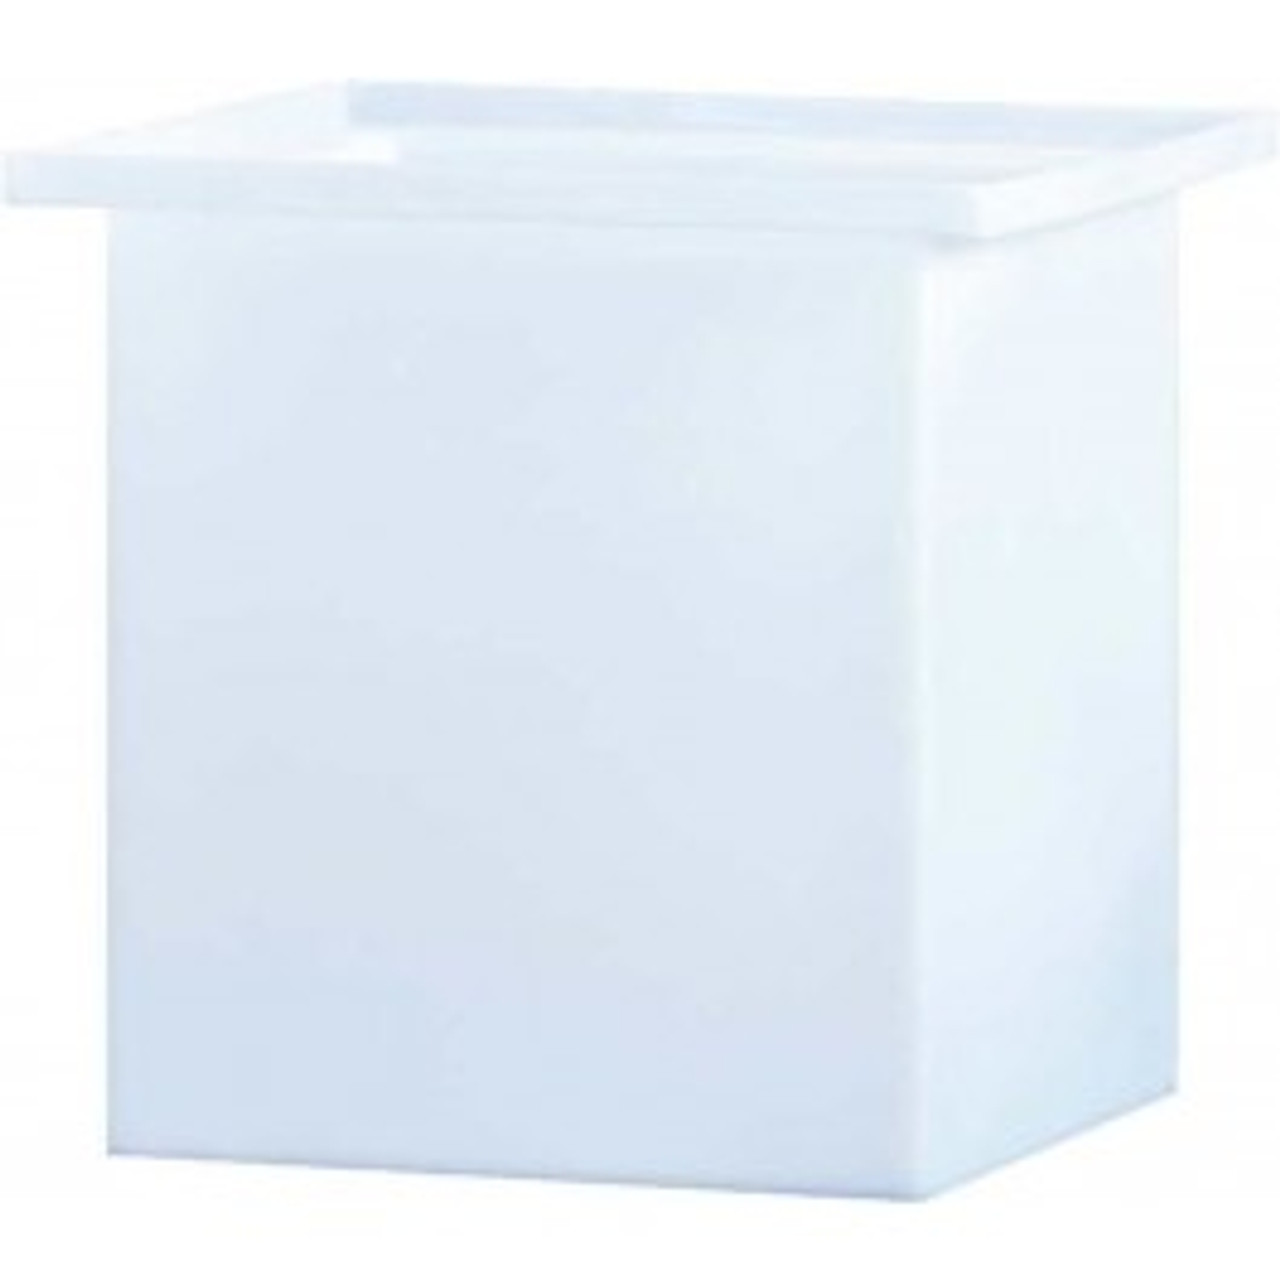 An image of a 7 Gallon PP Chem-Tainer White Rectangular Open Top Tank | R121212B